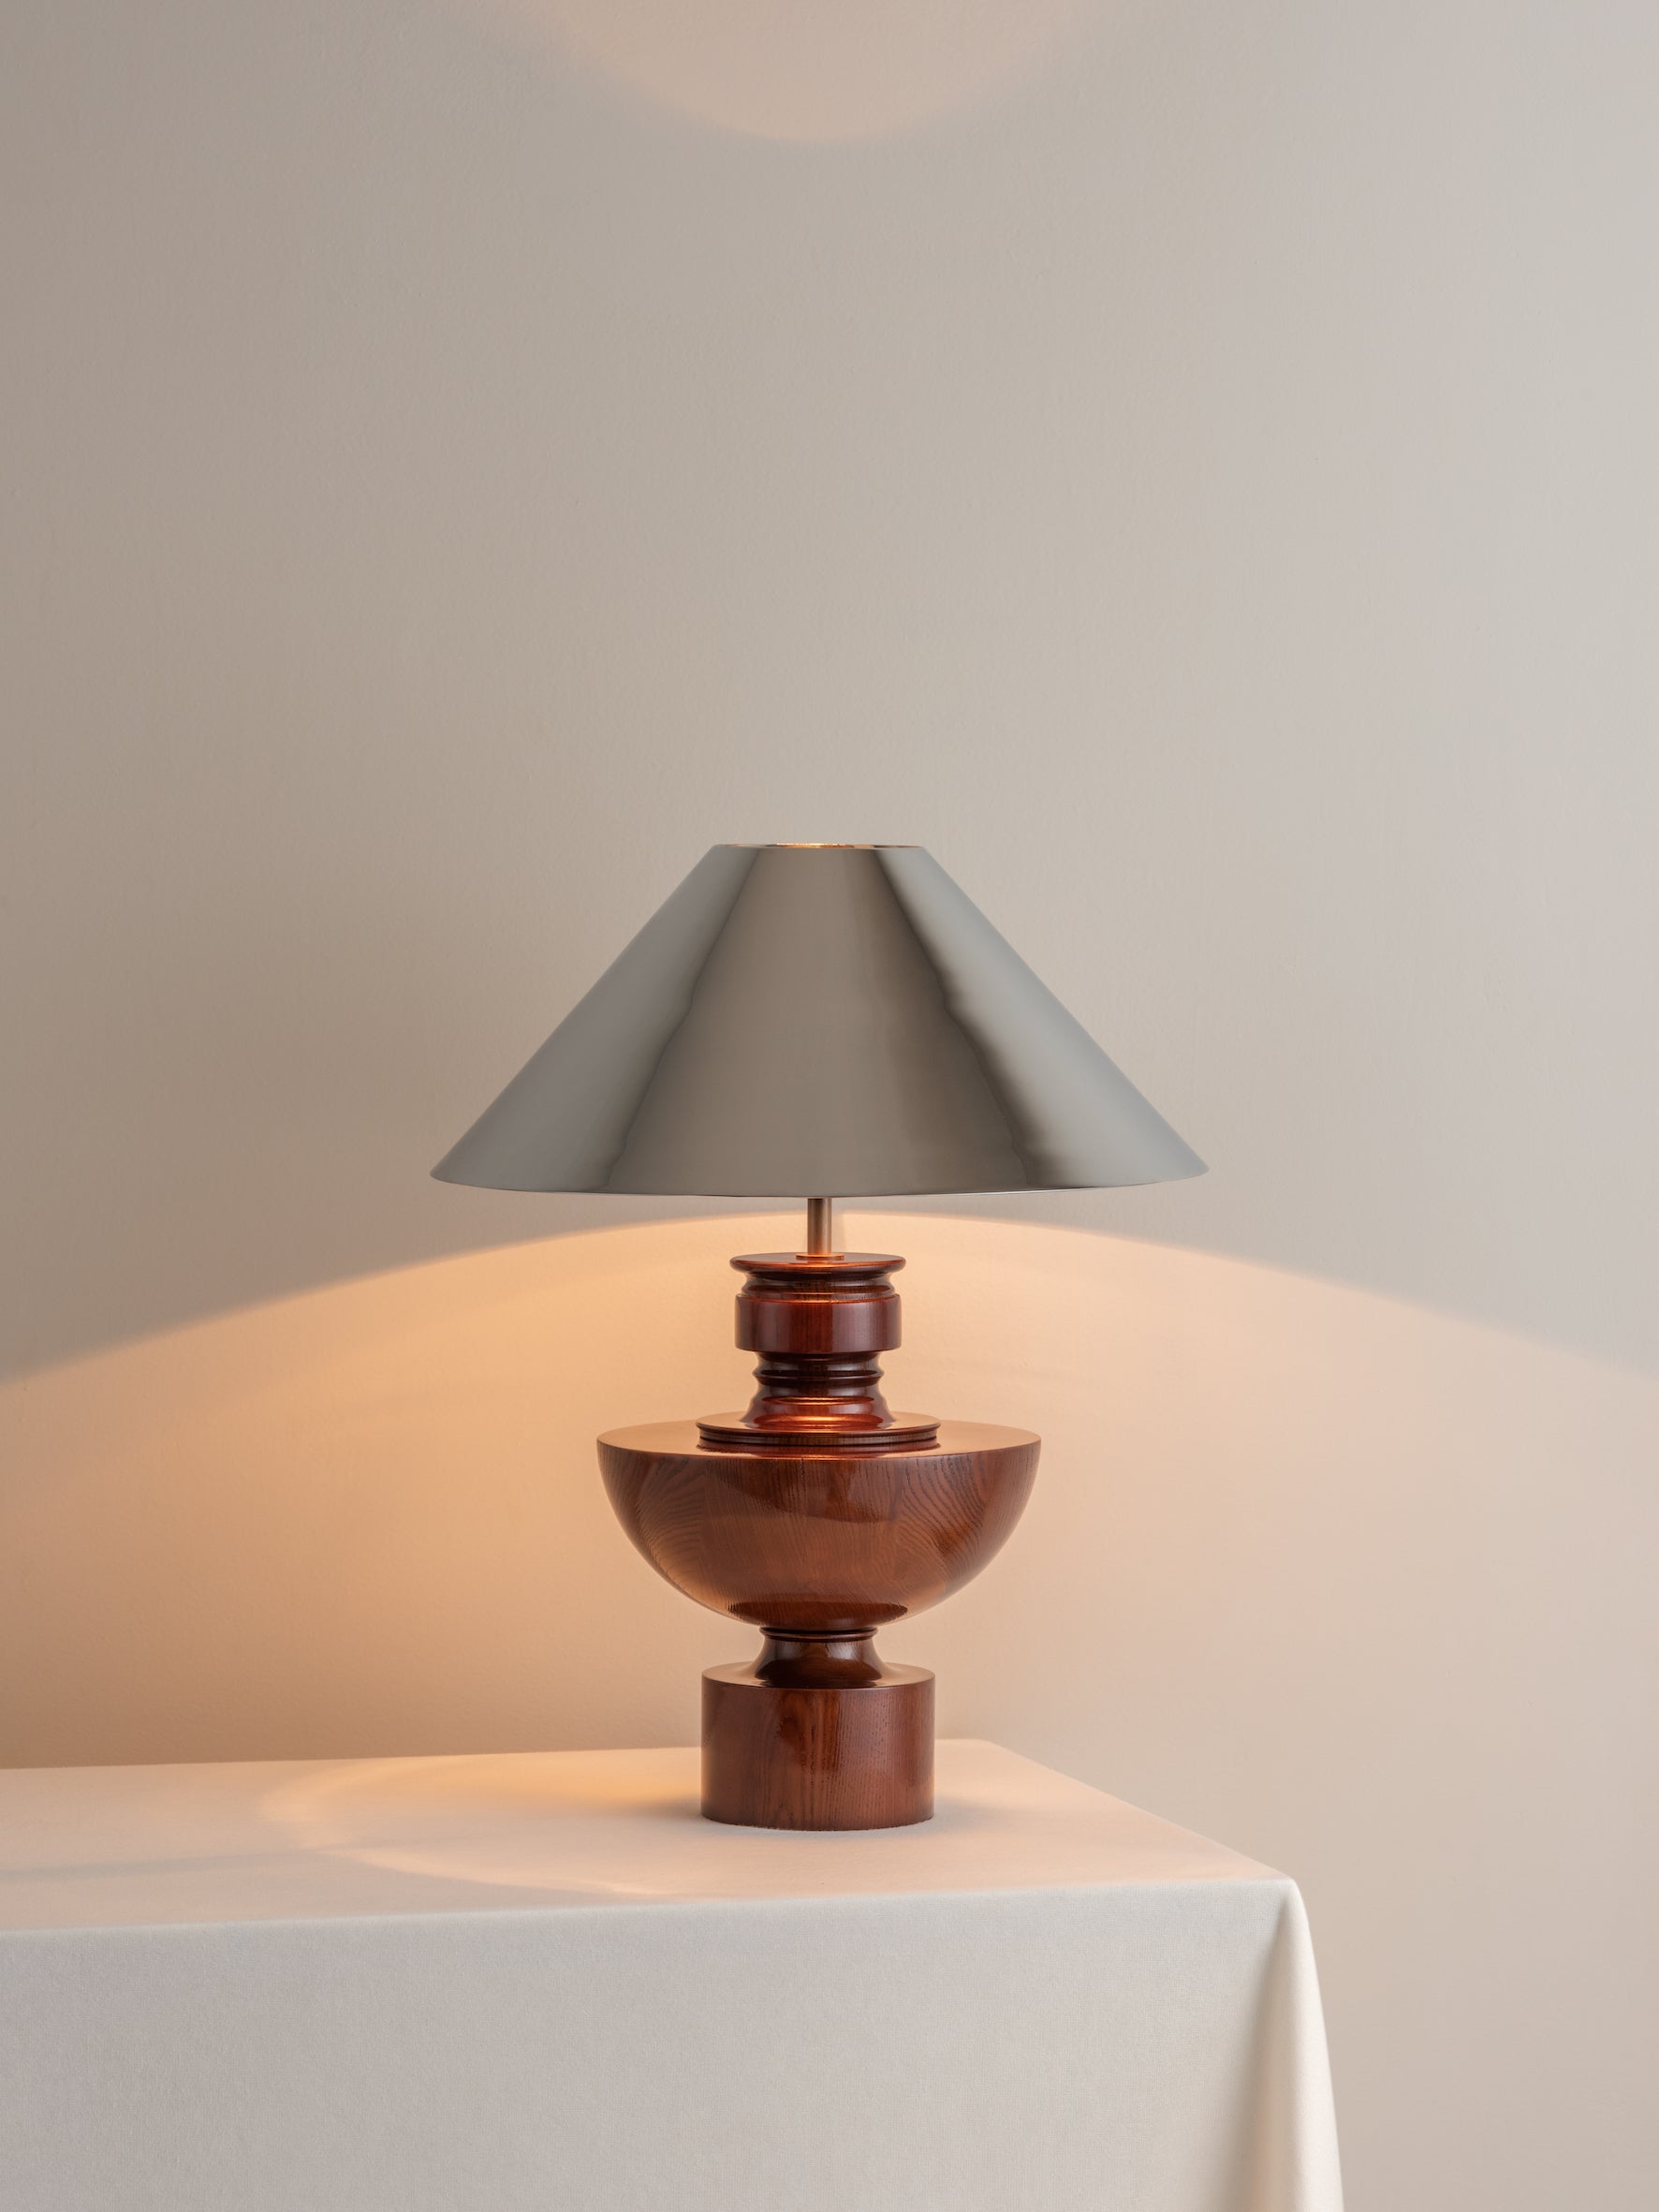 Editions spun wood lamp with + chrome shade | Table Lamp | Lights & Lamps | UK | Modern Affordable Designer Lighting